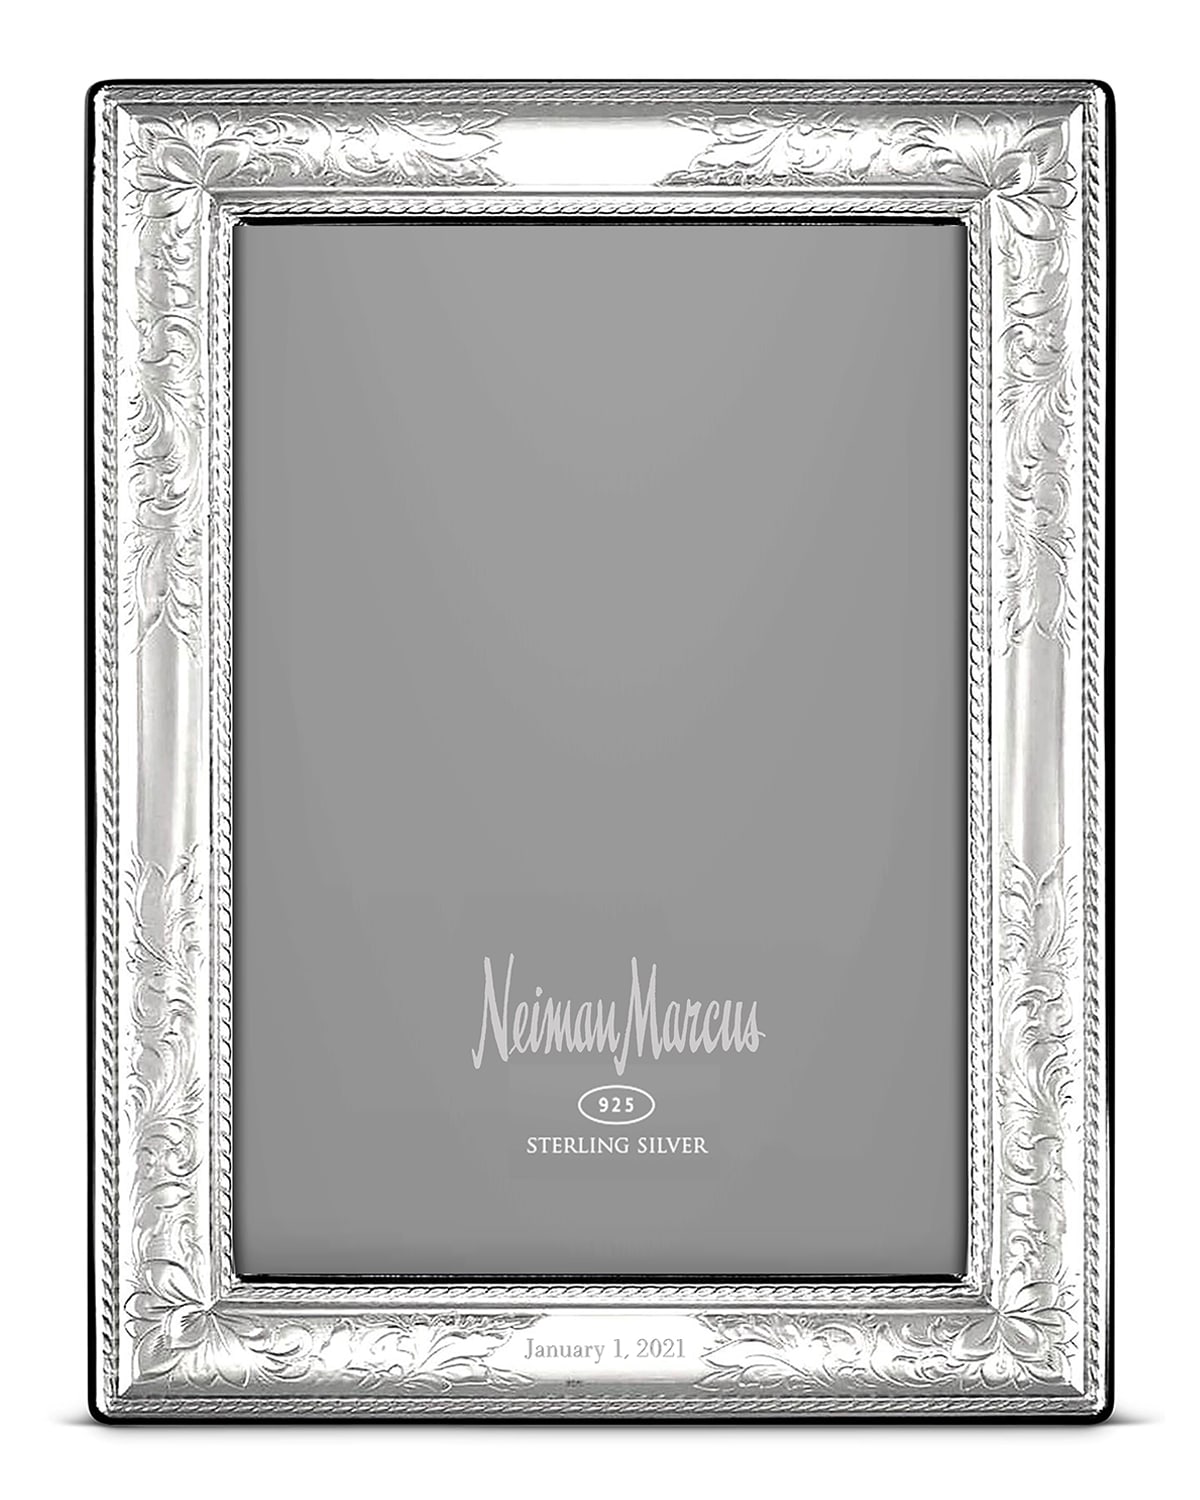 Cunill America Vintage Personalized Frame, 8" X 10" In Silver Block Font